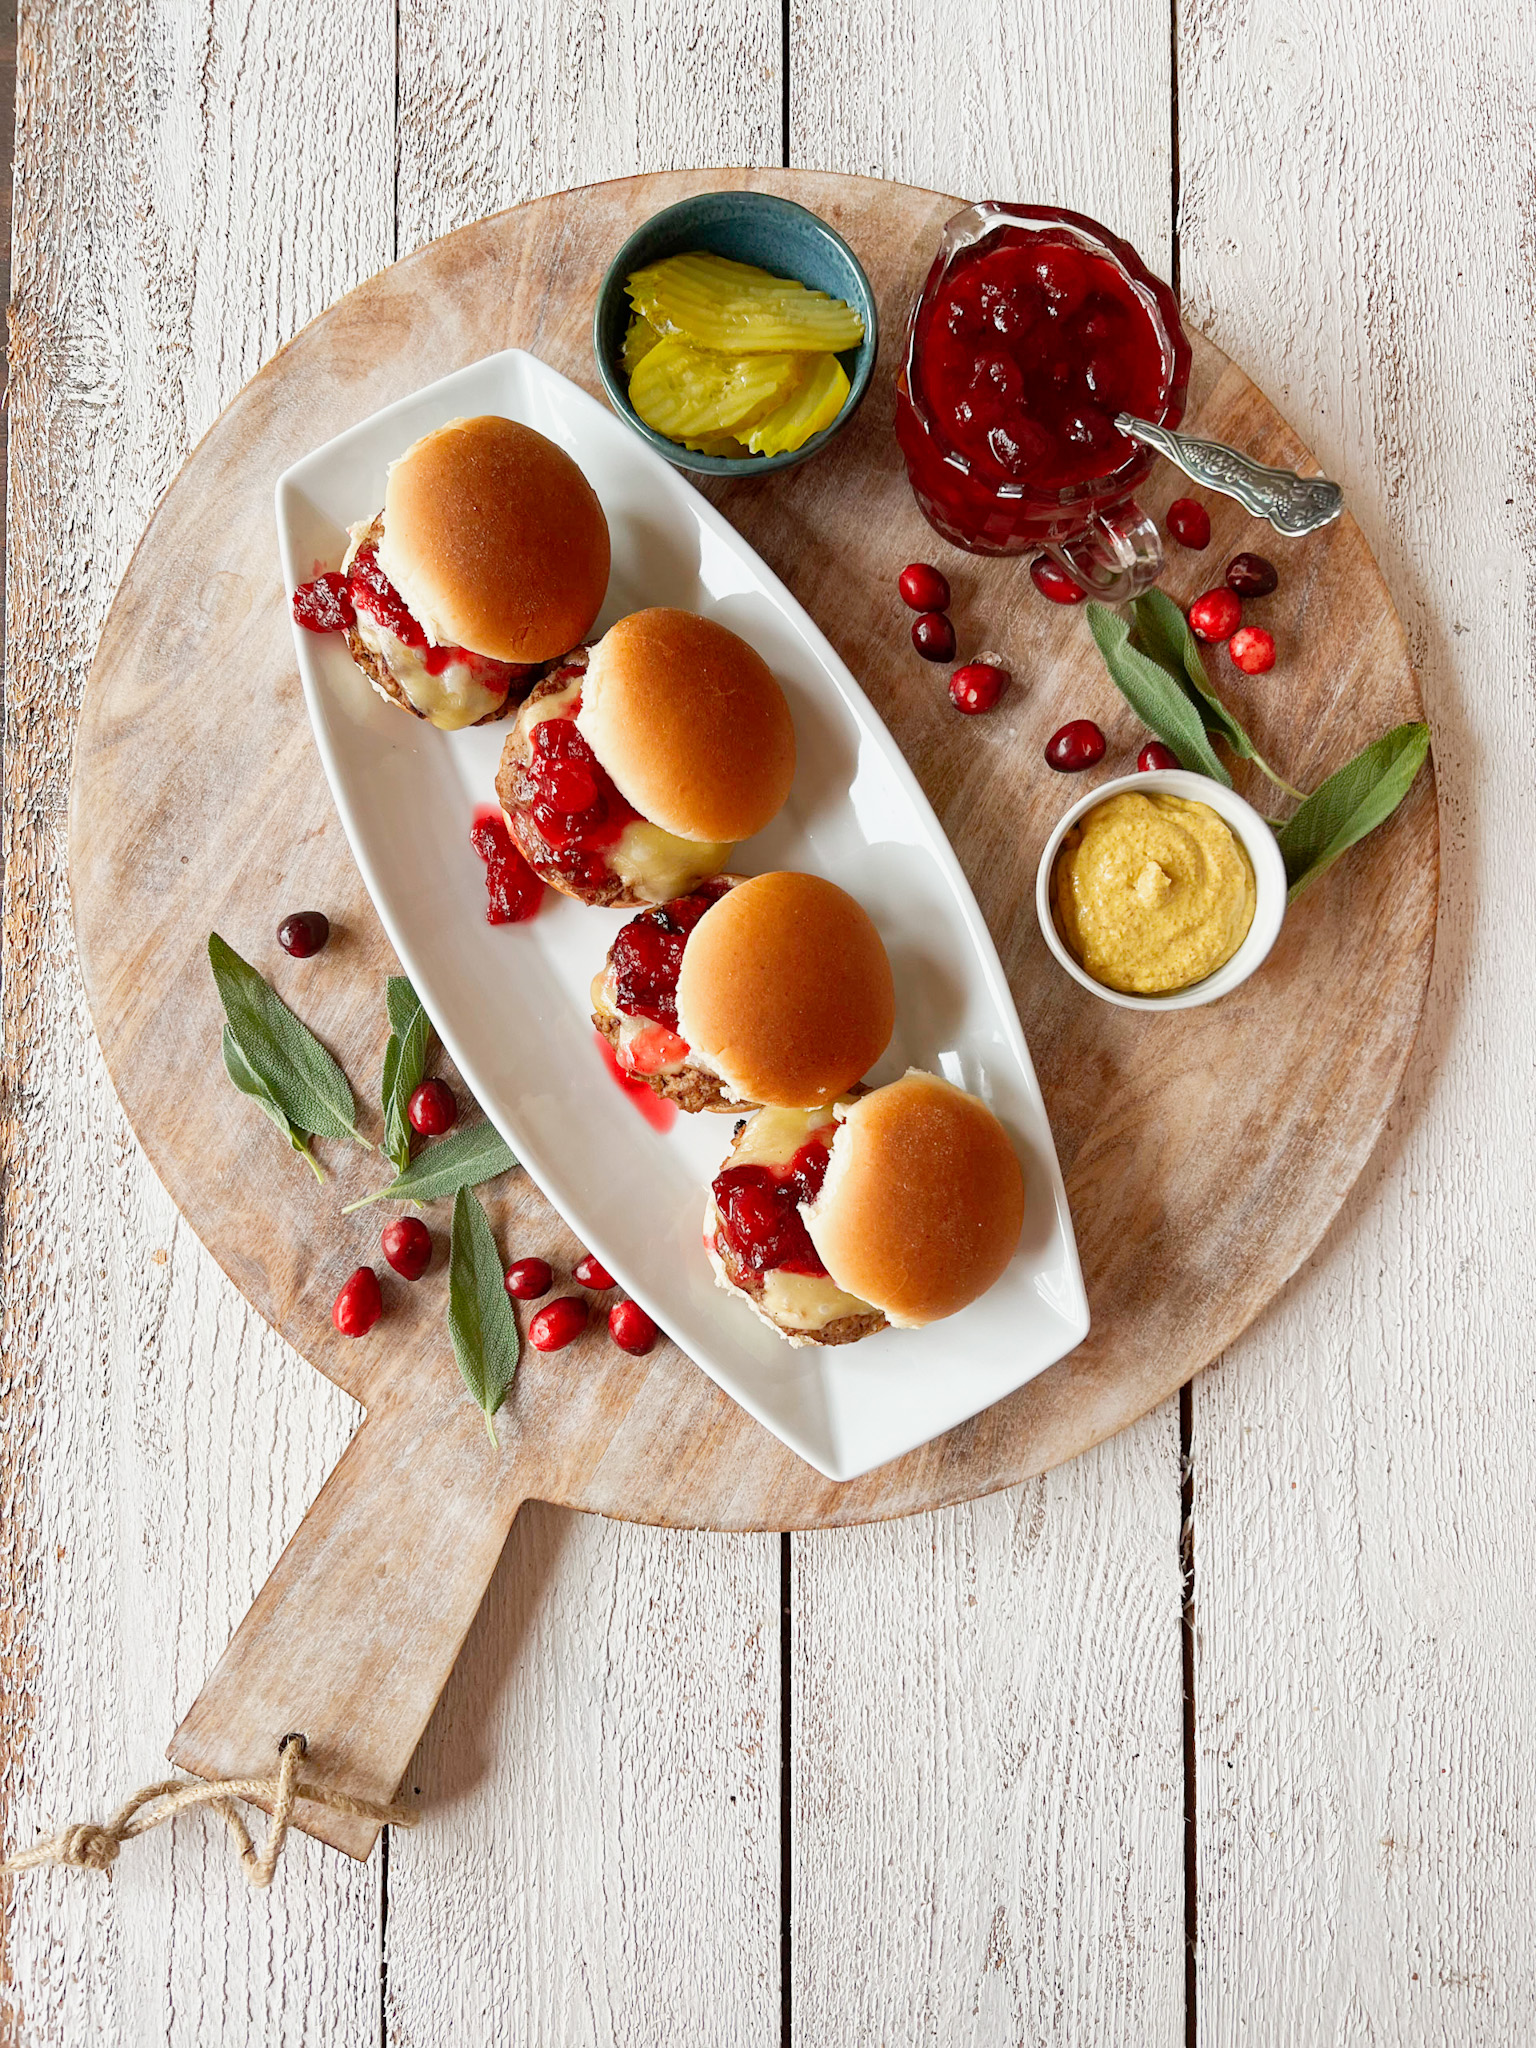 Turkey Burger Sliders with Pickles and Mustard